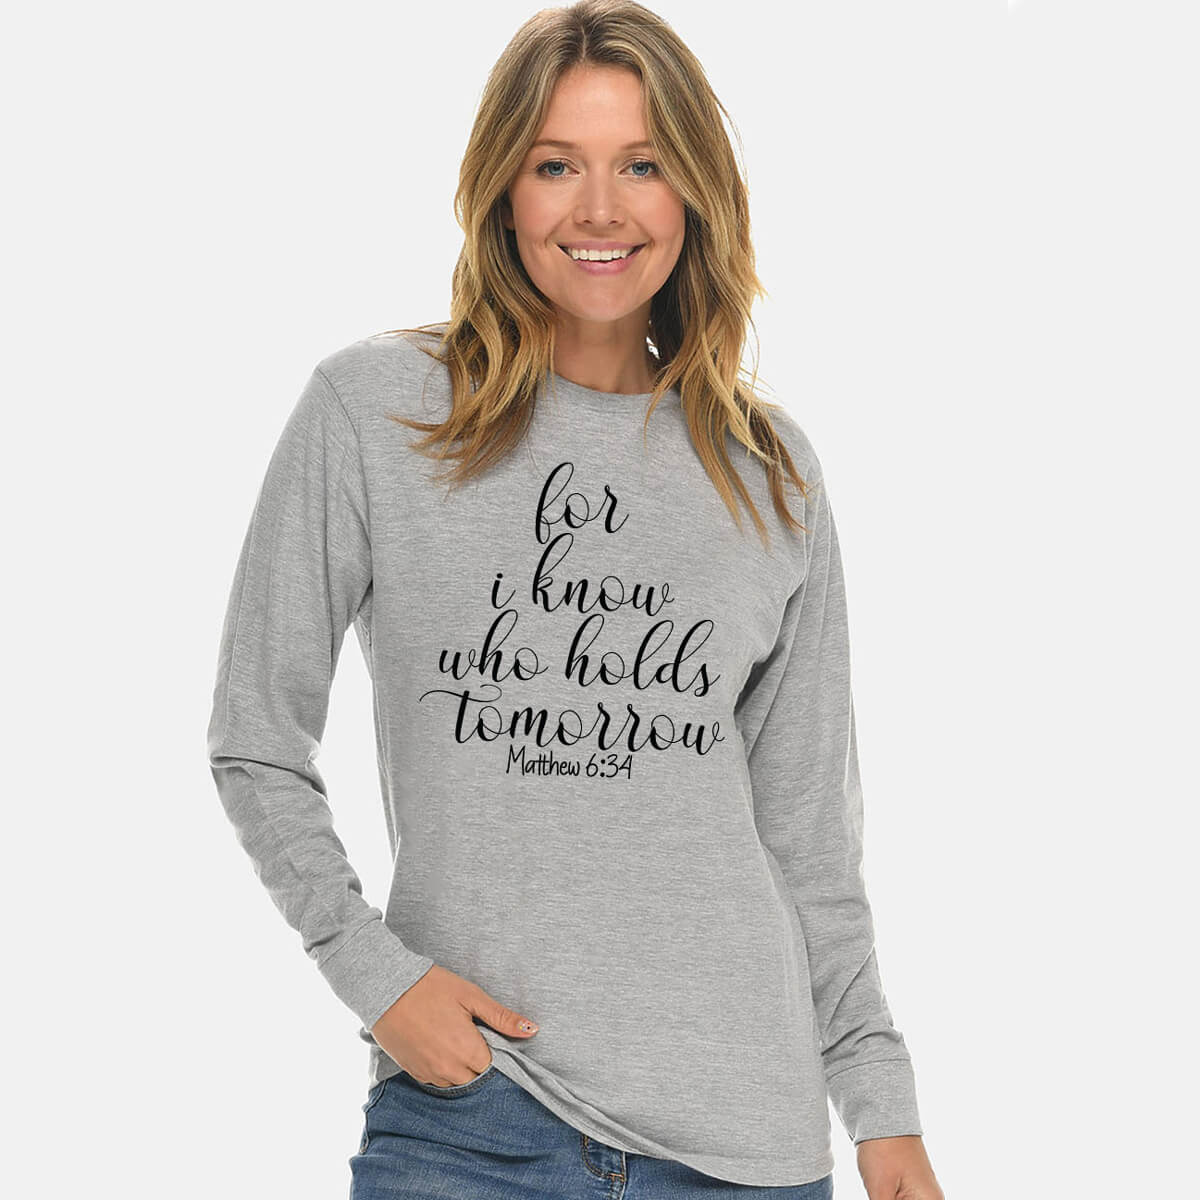 For I Know Who Holds Tomorrow Unisex Long Sleeve T Shirt